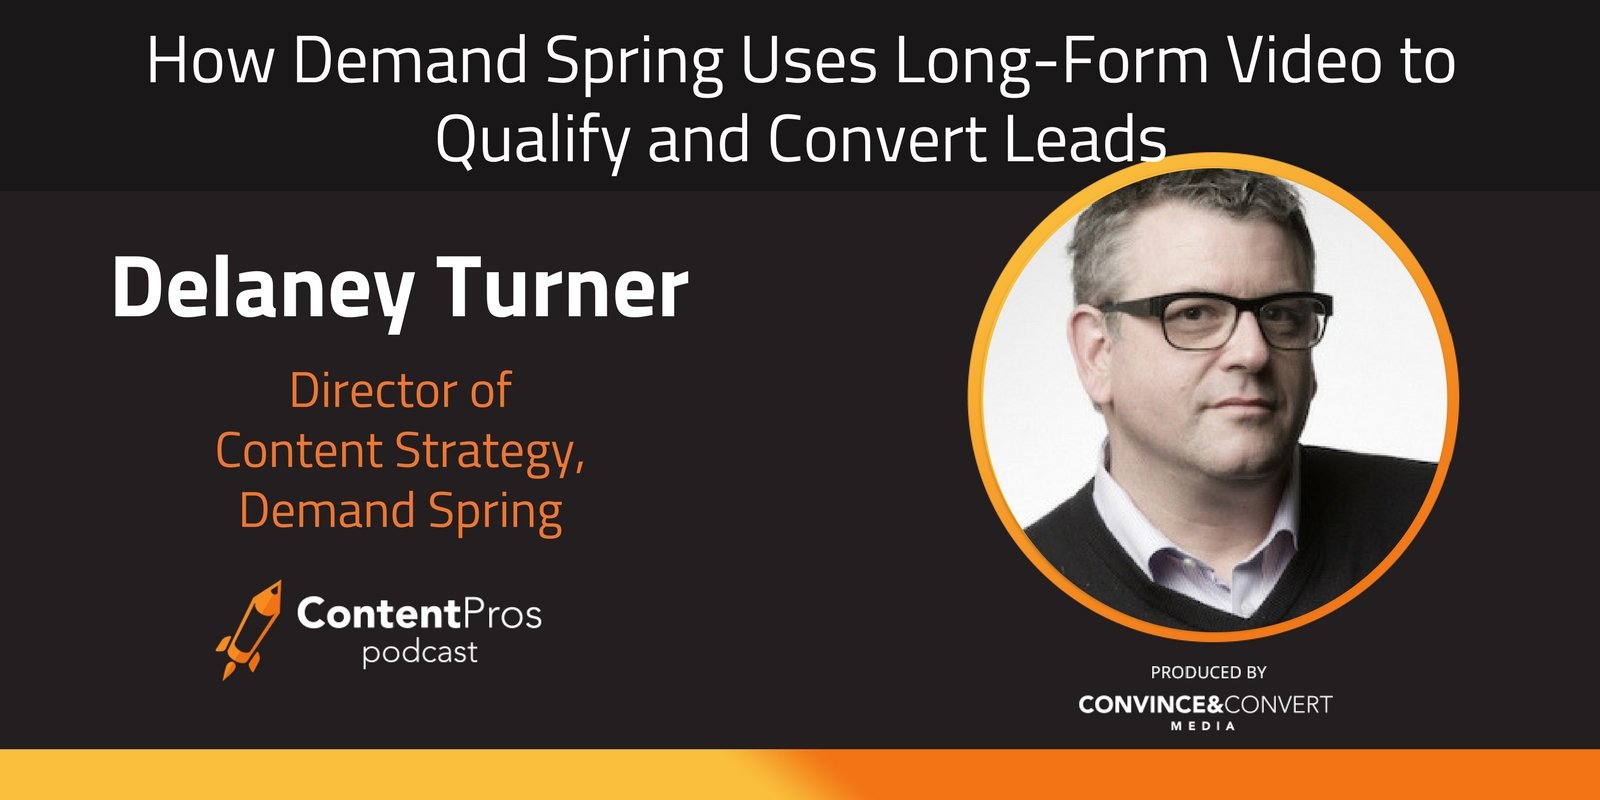 How Demand Spring Uses Long-Form Video to Qualify and Convert Leads